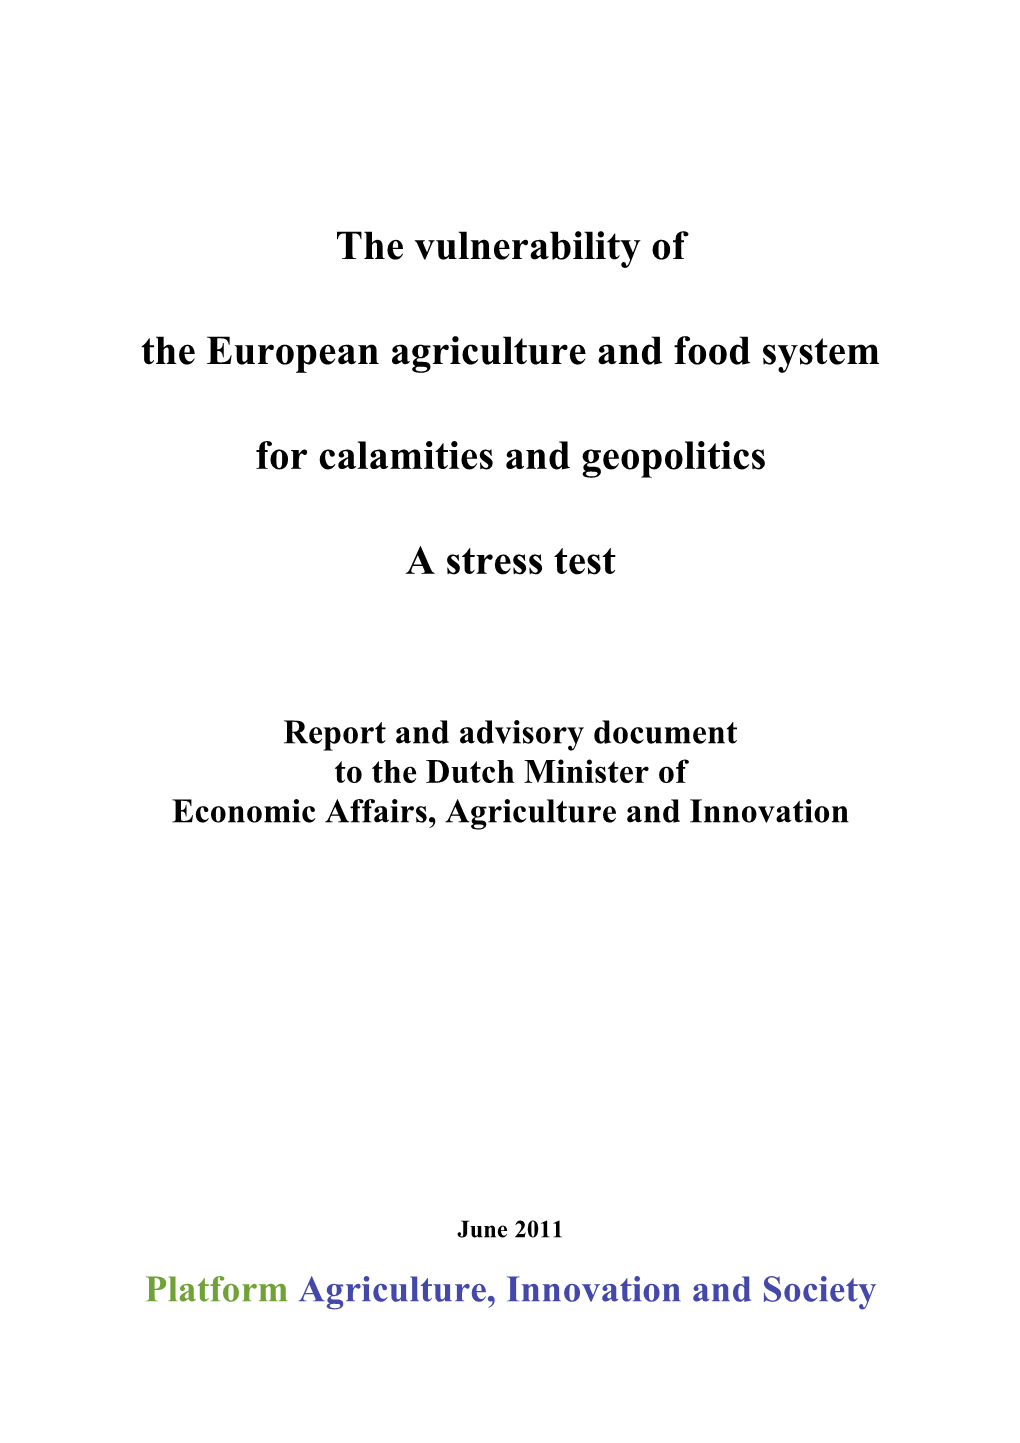 The Vulnerability of the European Agriculture and Food System for Calamities and Geopolitics a Stress Test